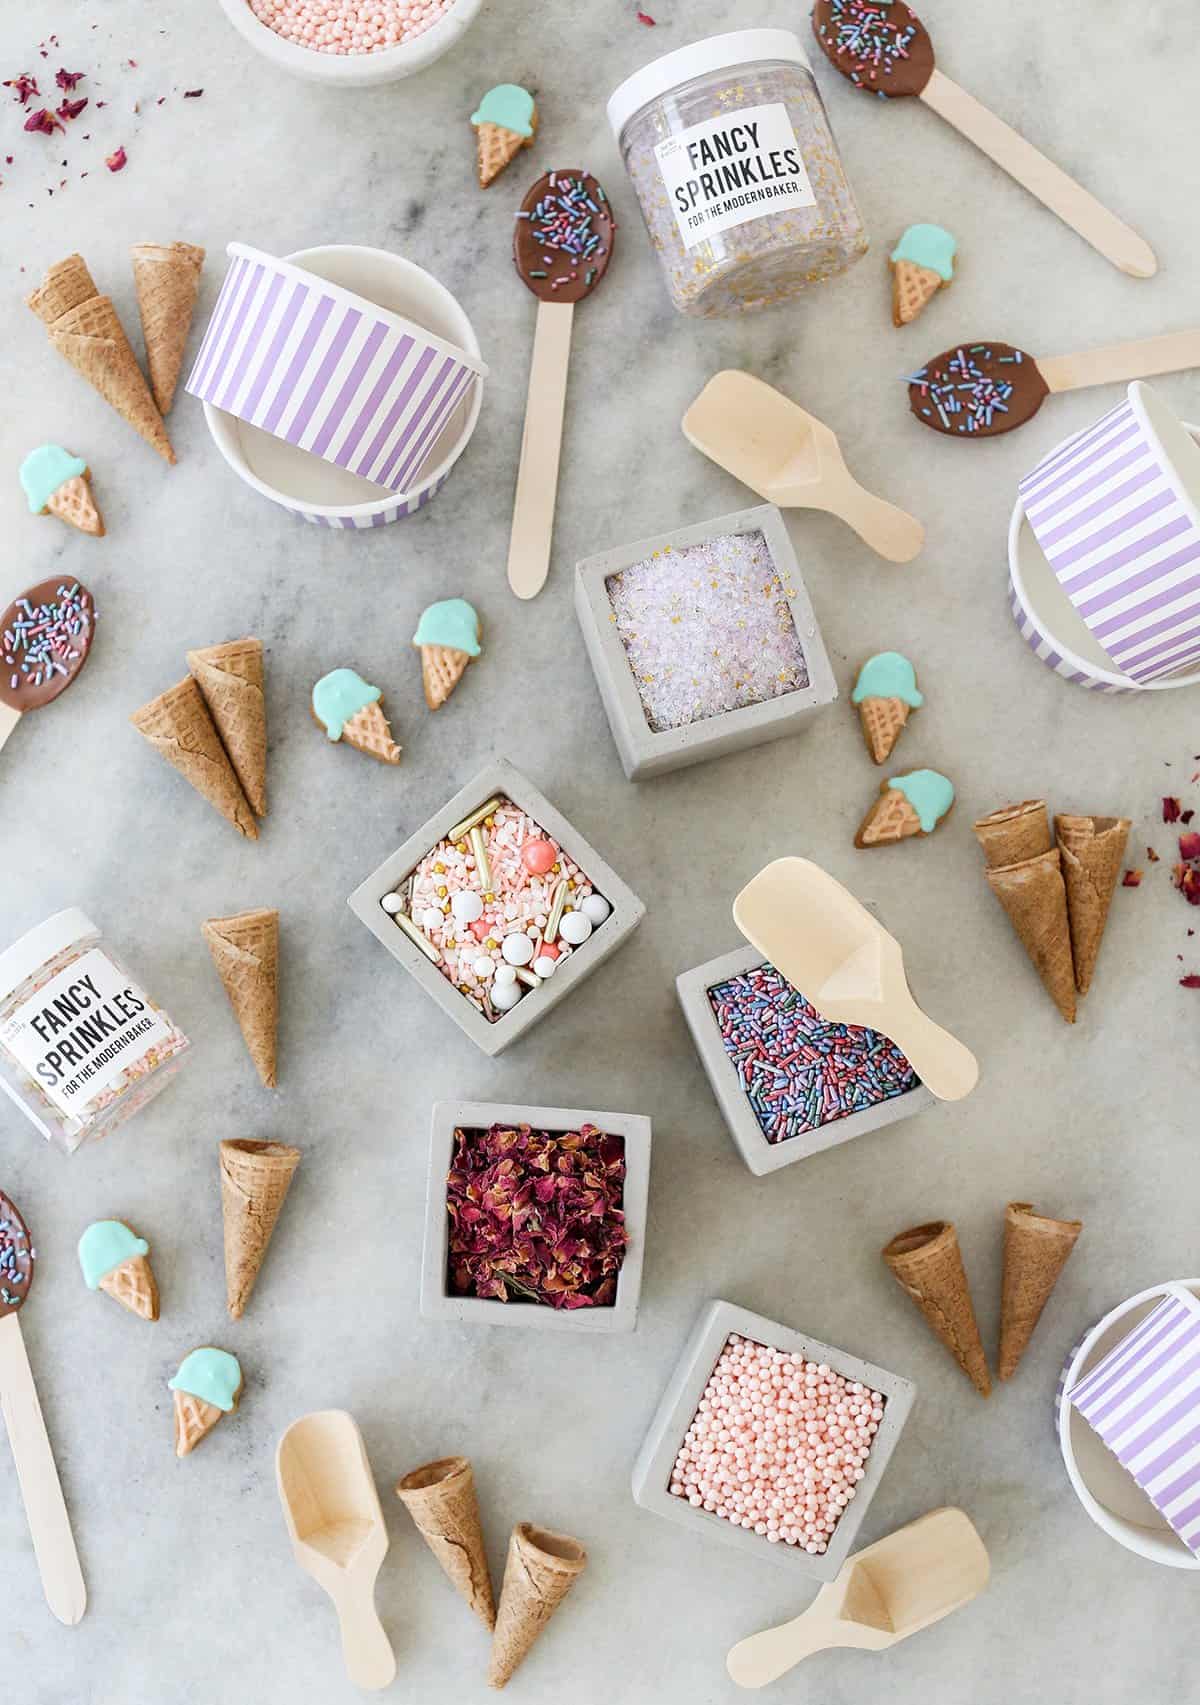 sprinkles, ice cream cones and dipped chocolate spoons for ice cream bar toppings